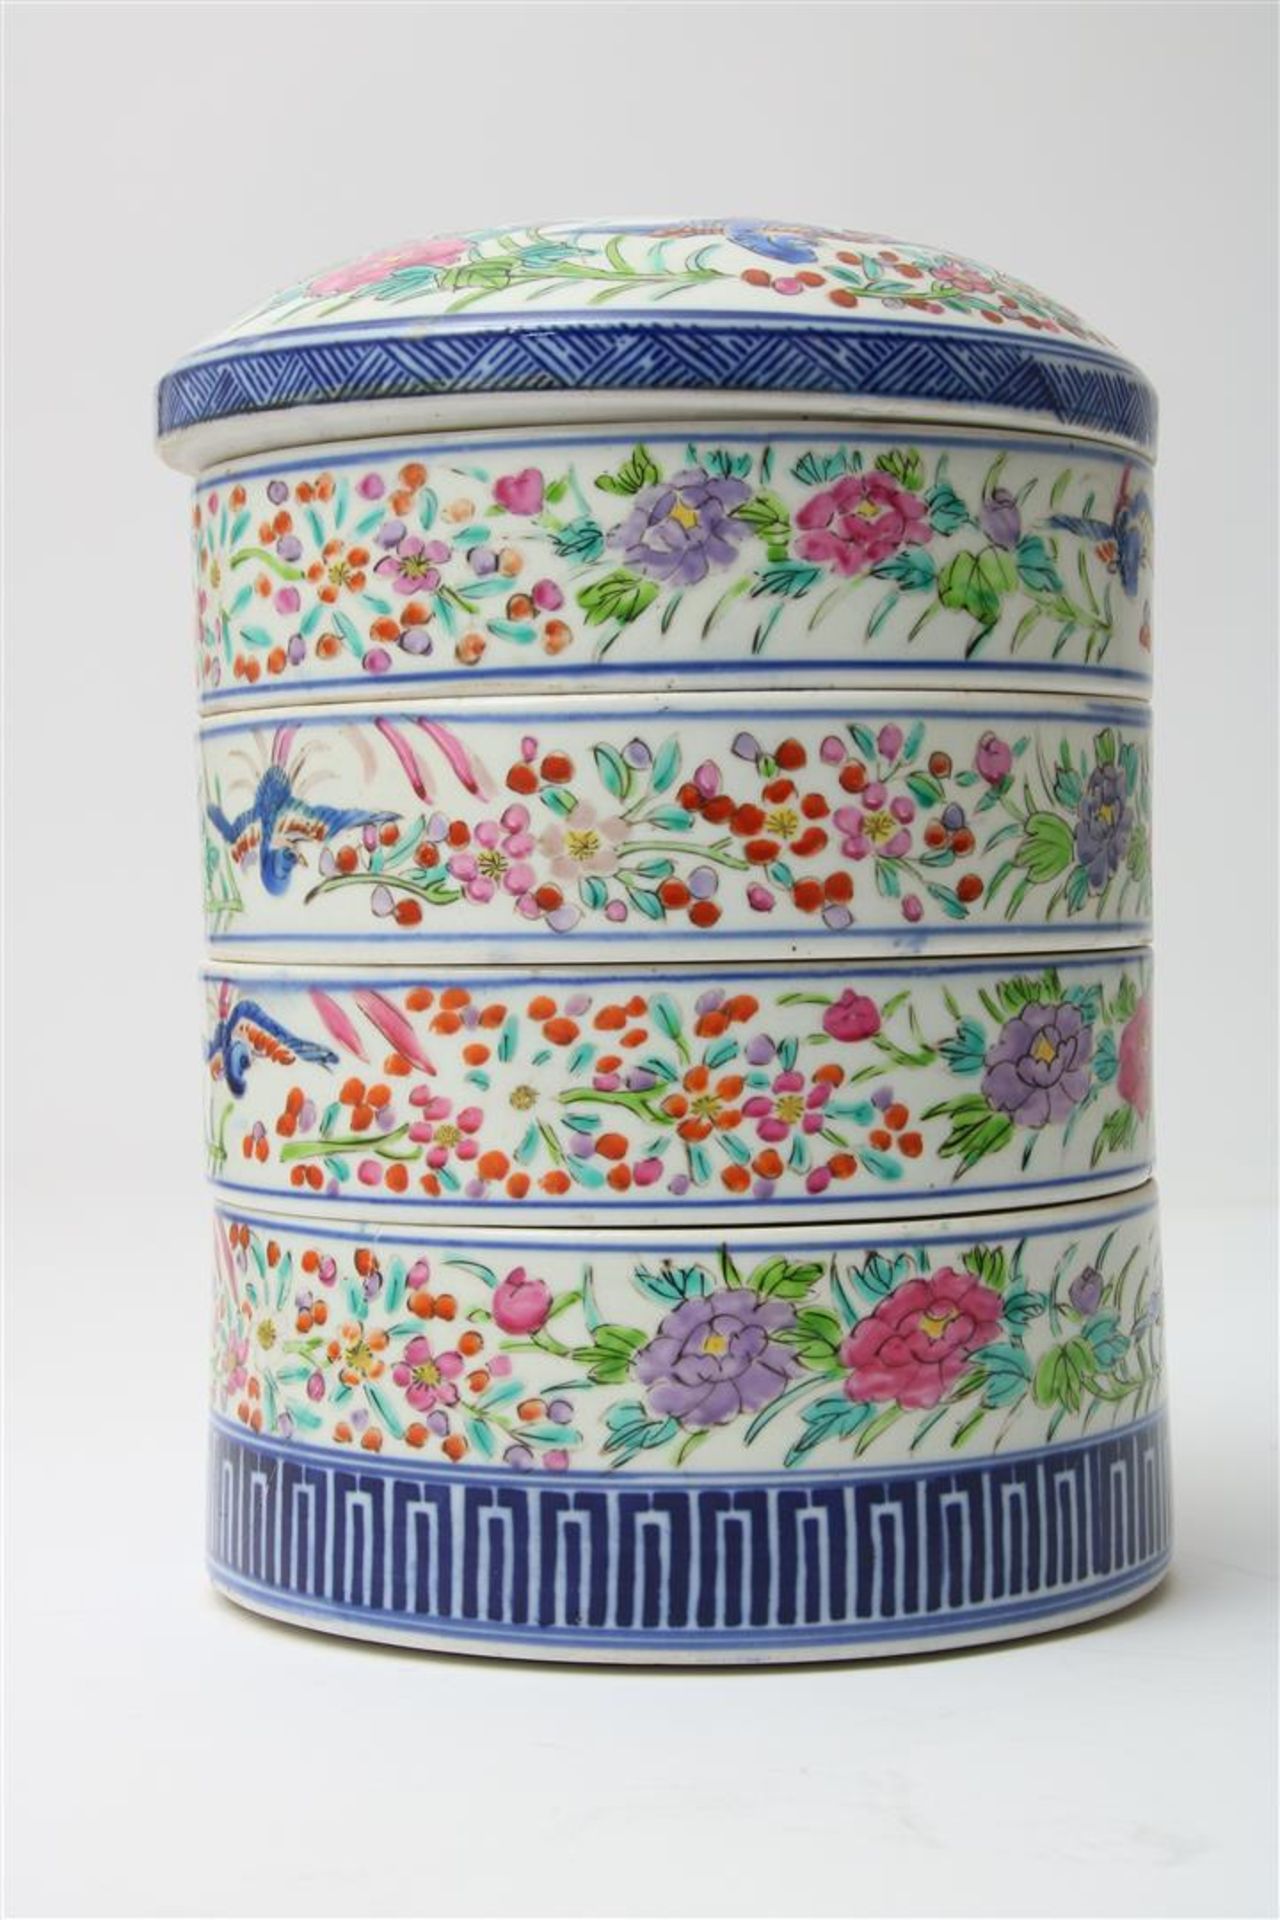 Polychrome porcelain tingkat painted with flowers and phoenixes, consisting of 4 layers, on the